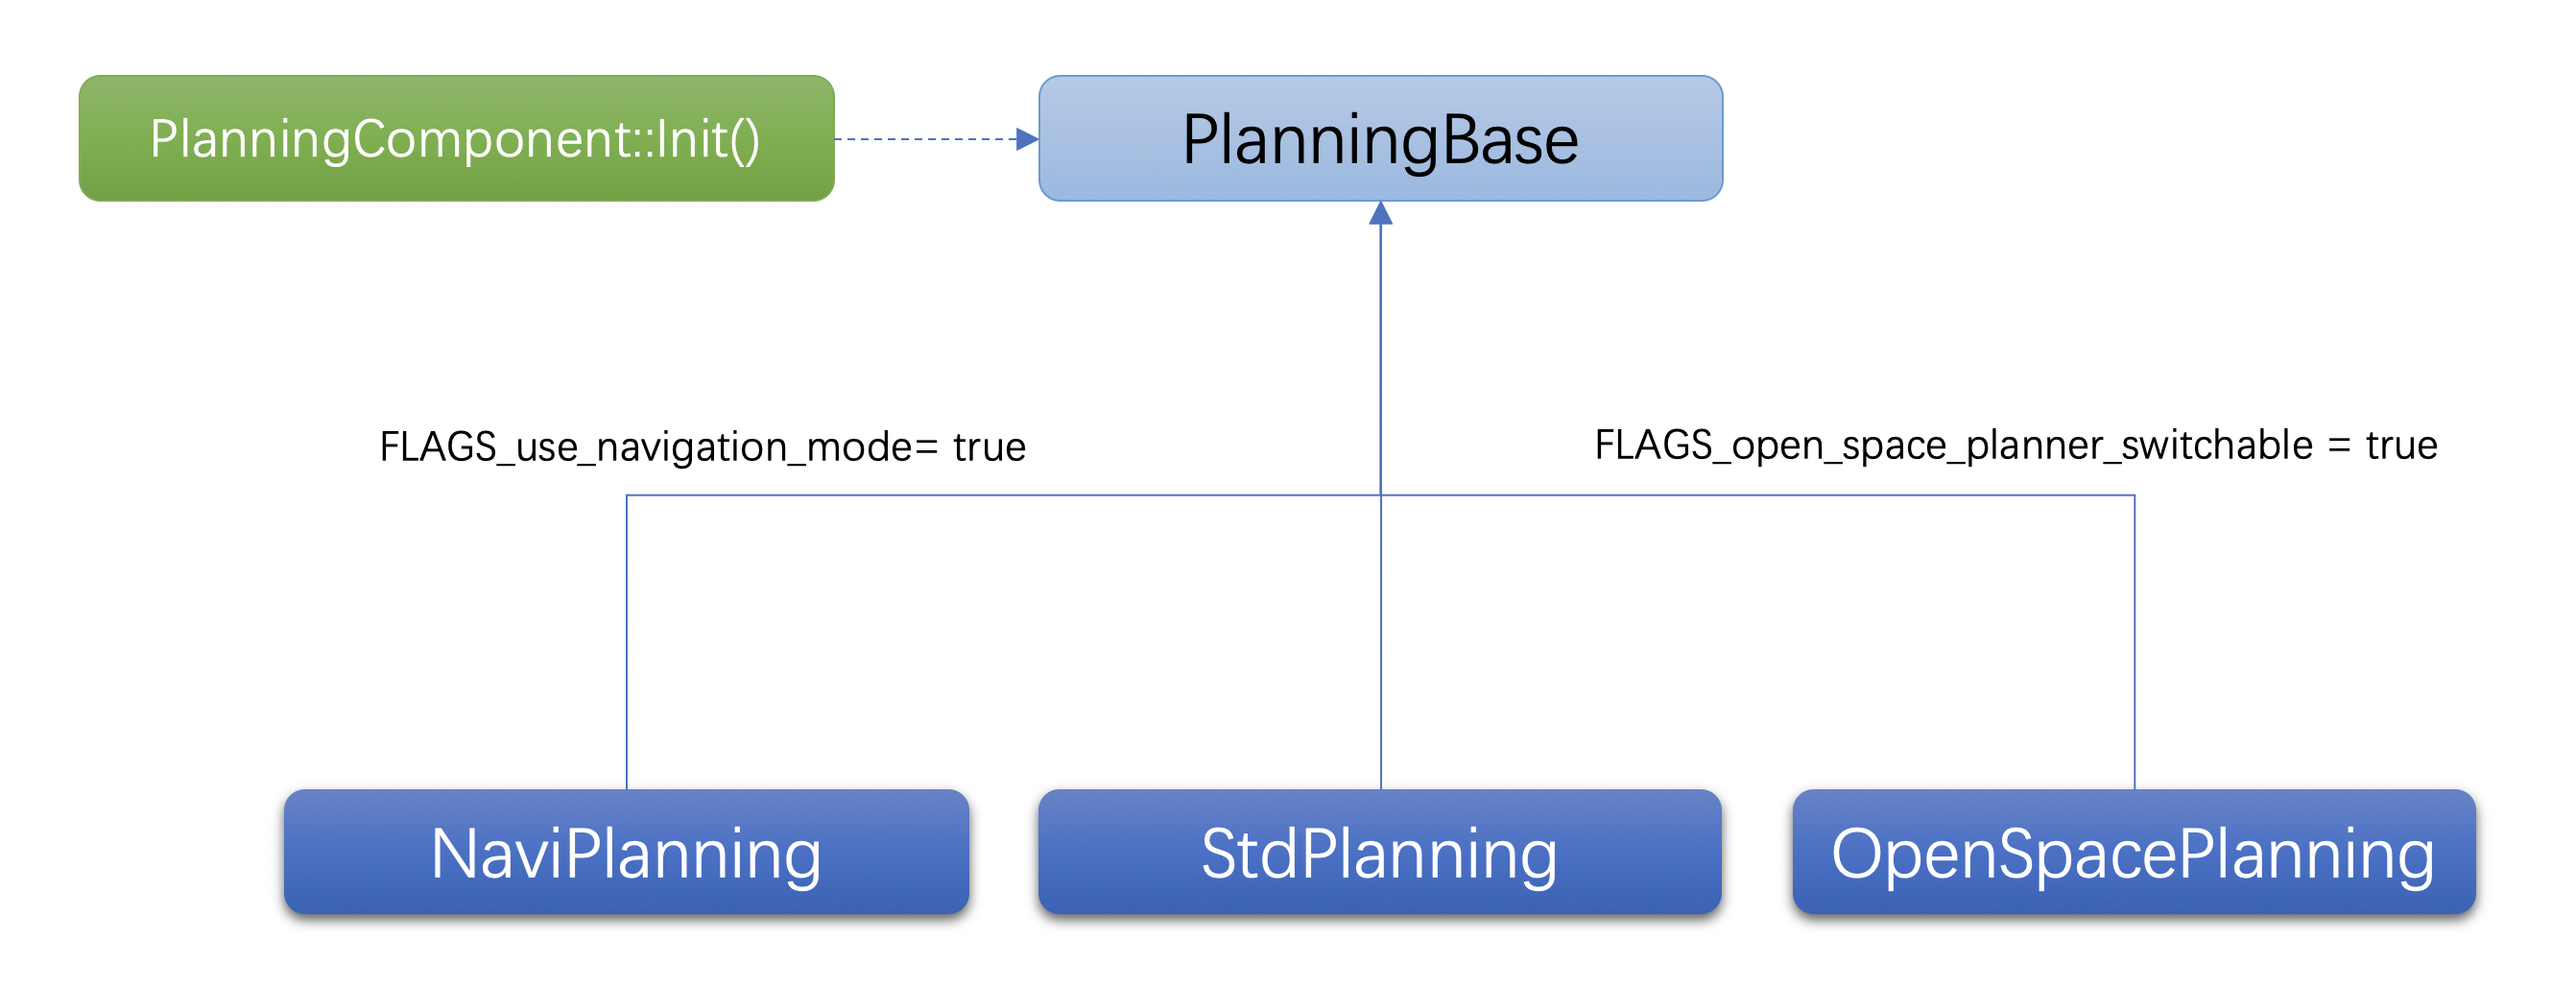 PlanningBase.png